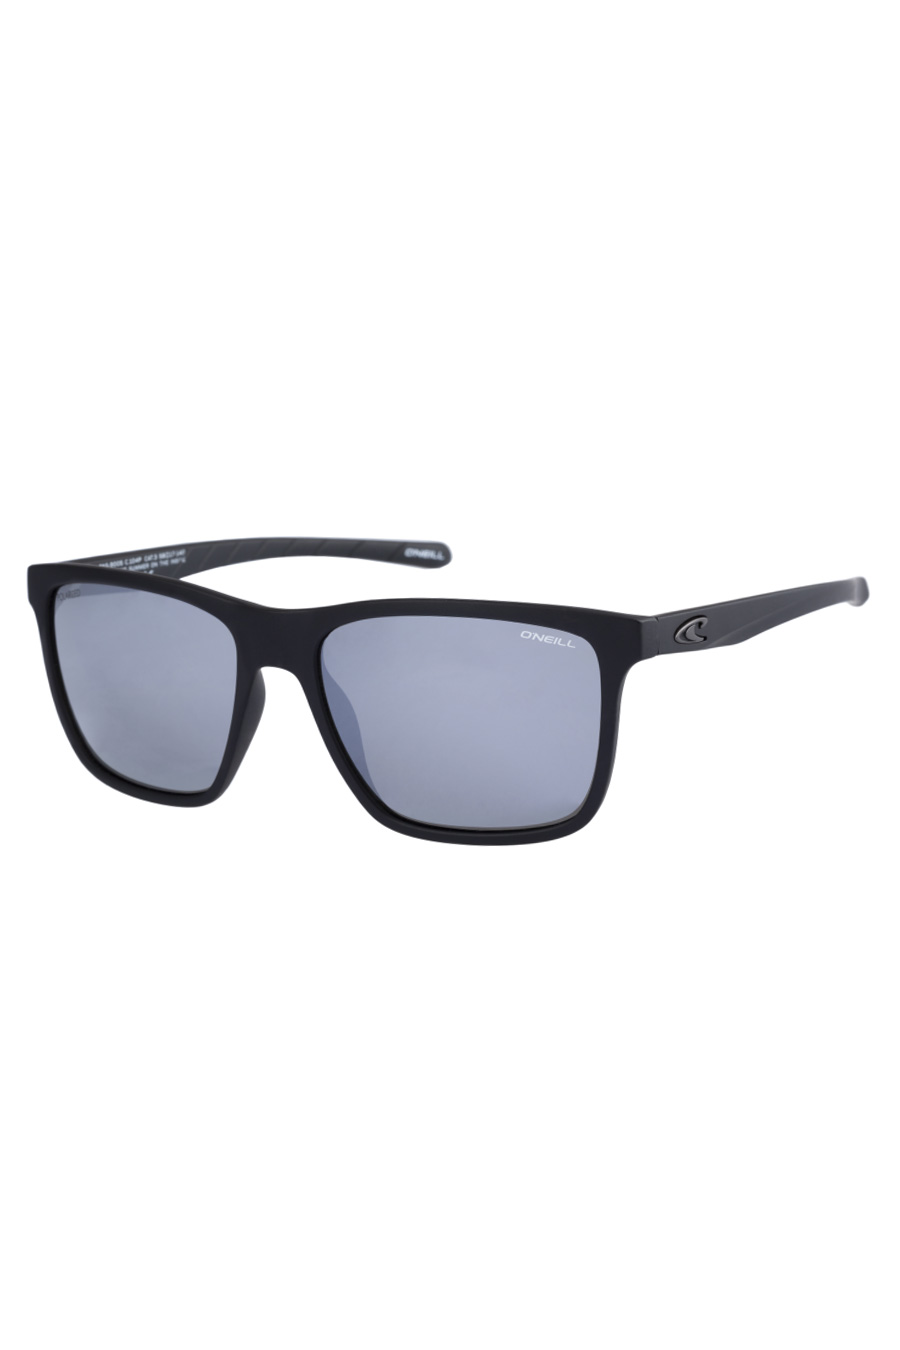 Saulesbrilles ONEILL ONS-9005-20-104P